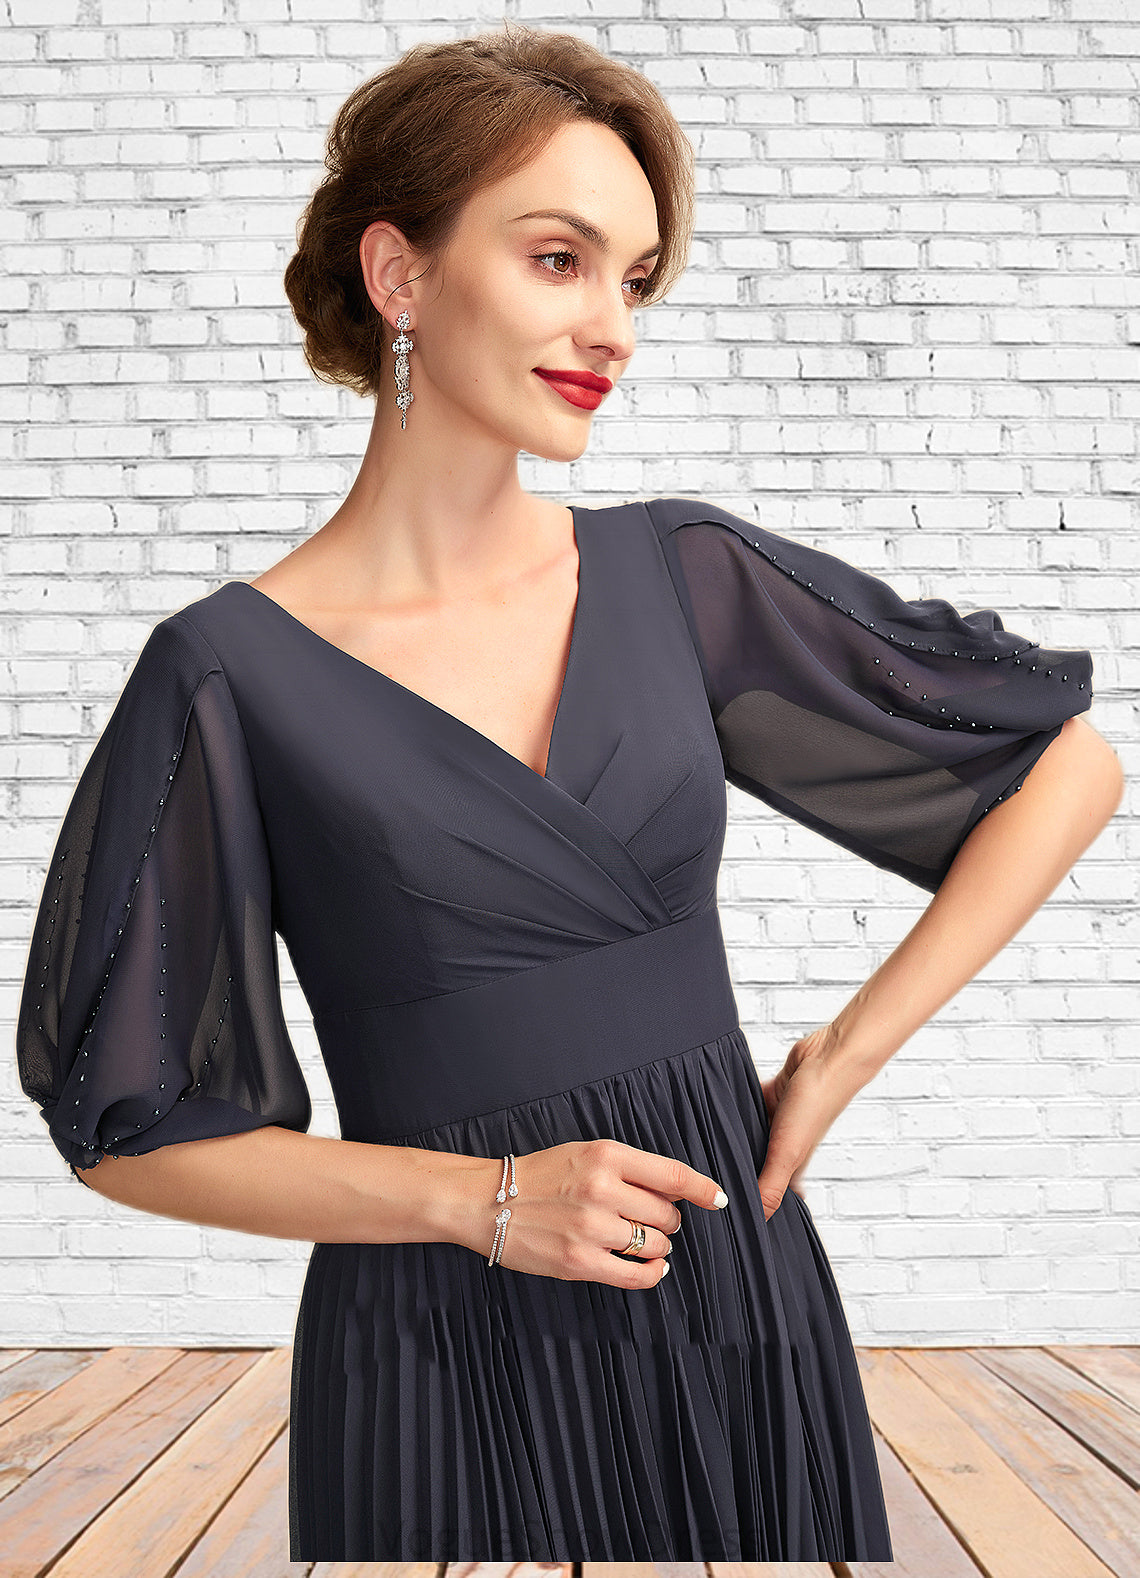 Teagan A-Line V-neck Tea-Length Chiffon Mother of the Bride Dress With Pleated DL126P0015012